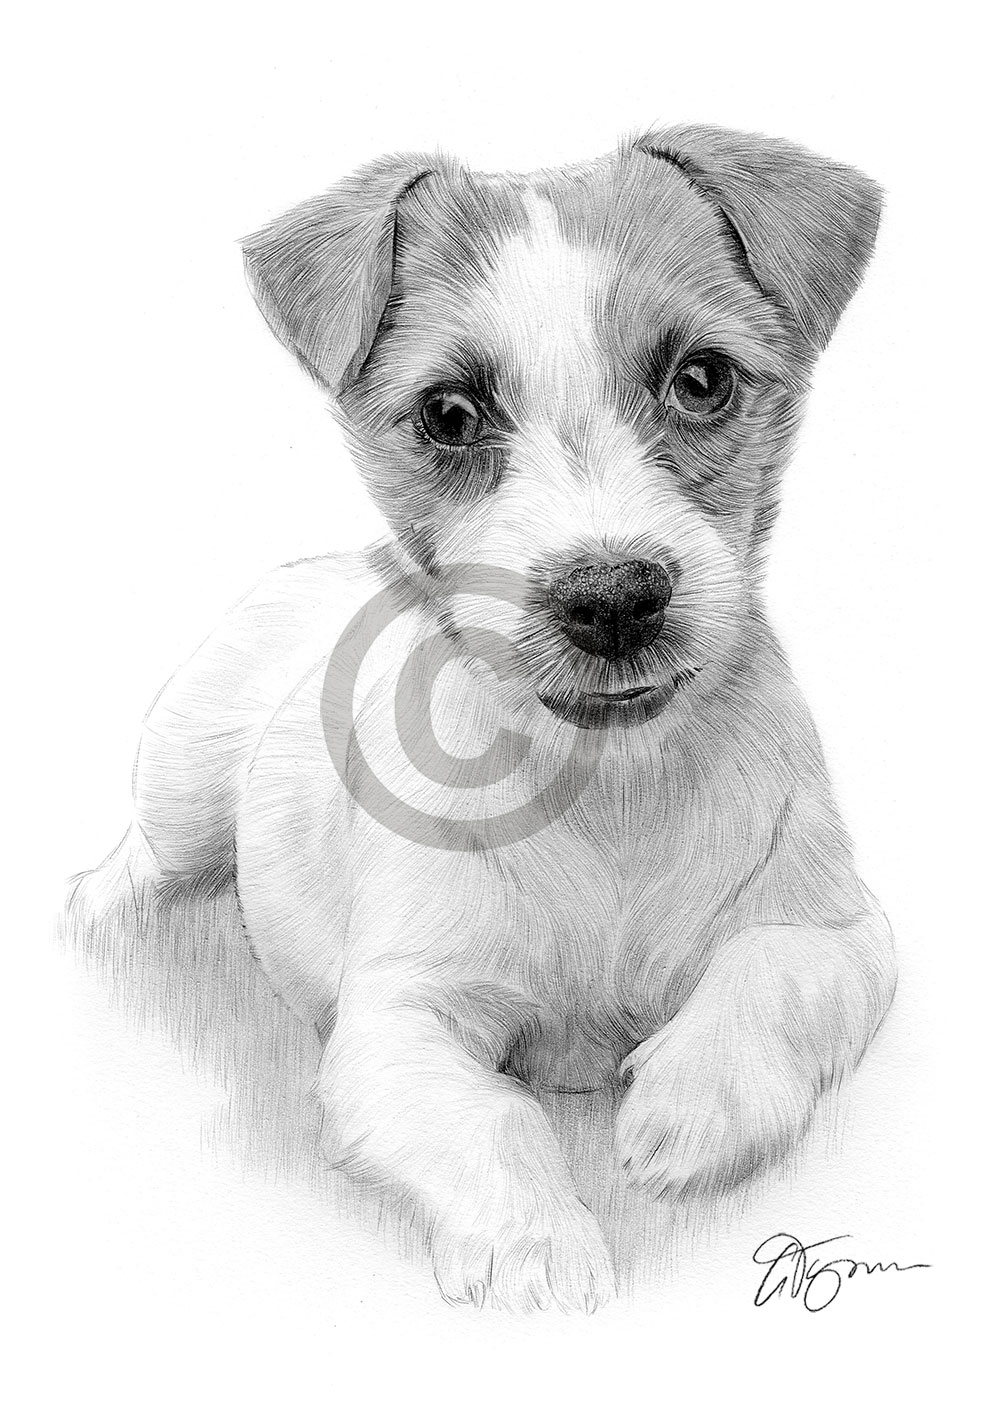 Pencil drawing of a young Jack Russell Terrier puppy by UK artist Gary